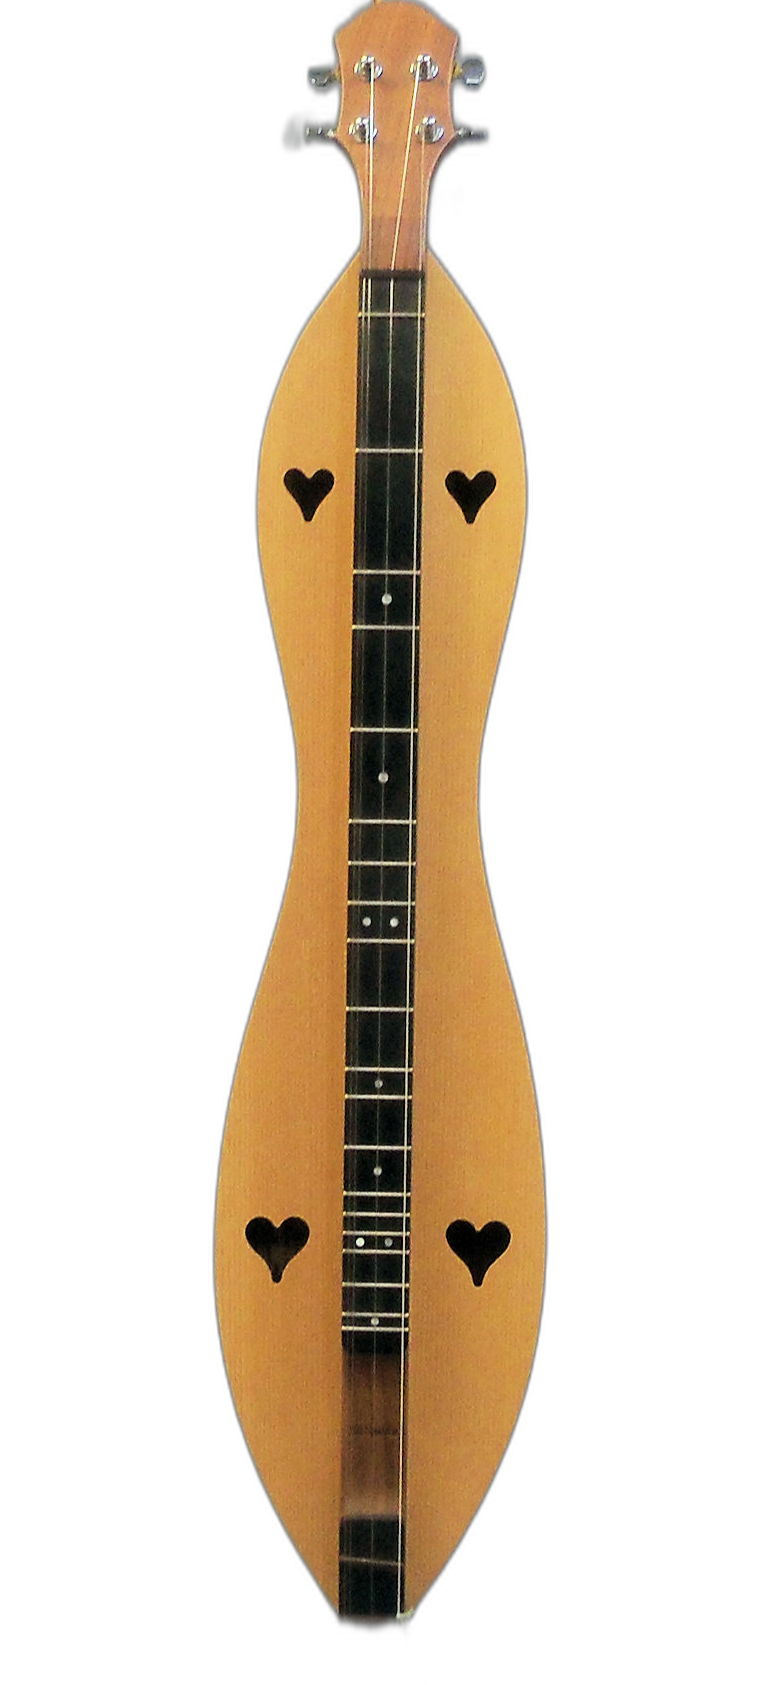 A hand-crafted 26" 4 String, Flathead, Hourglass with Walnut back, sides and Spalted Clear or Quartersawn Sycamore top adorned with two hearts, backed by a McSpadden Dulcimer lifetime warranty. Image shown with upgraded Ebony fretboard (add $140).